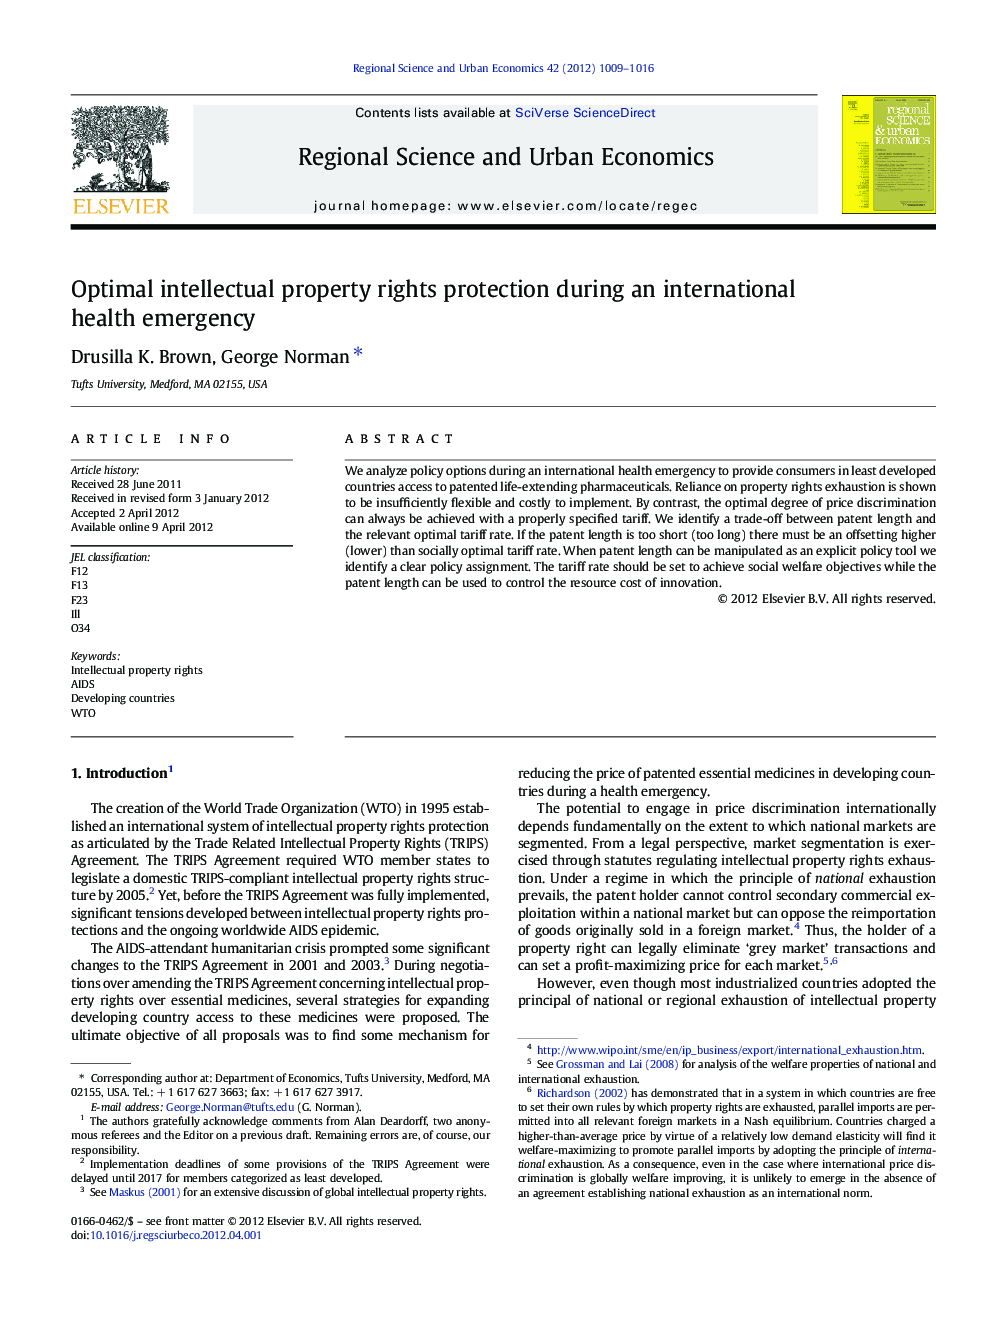 Optimal intellectual property rights protection during an international health emergency